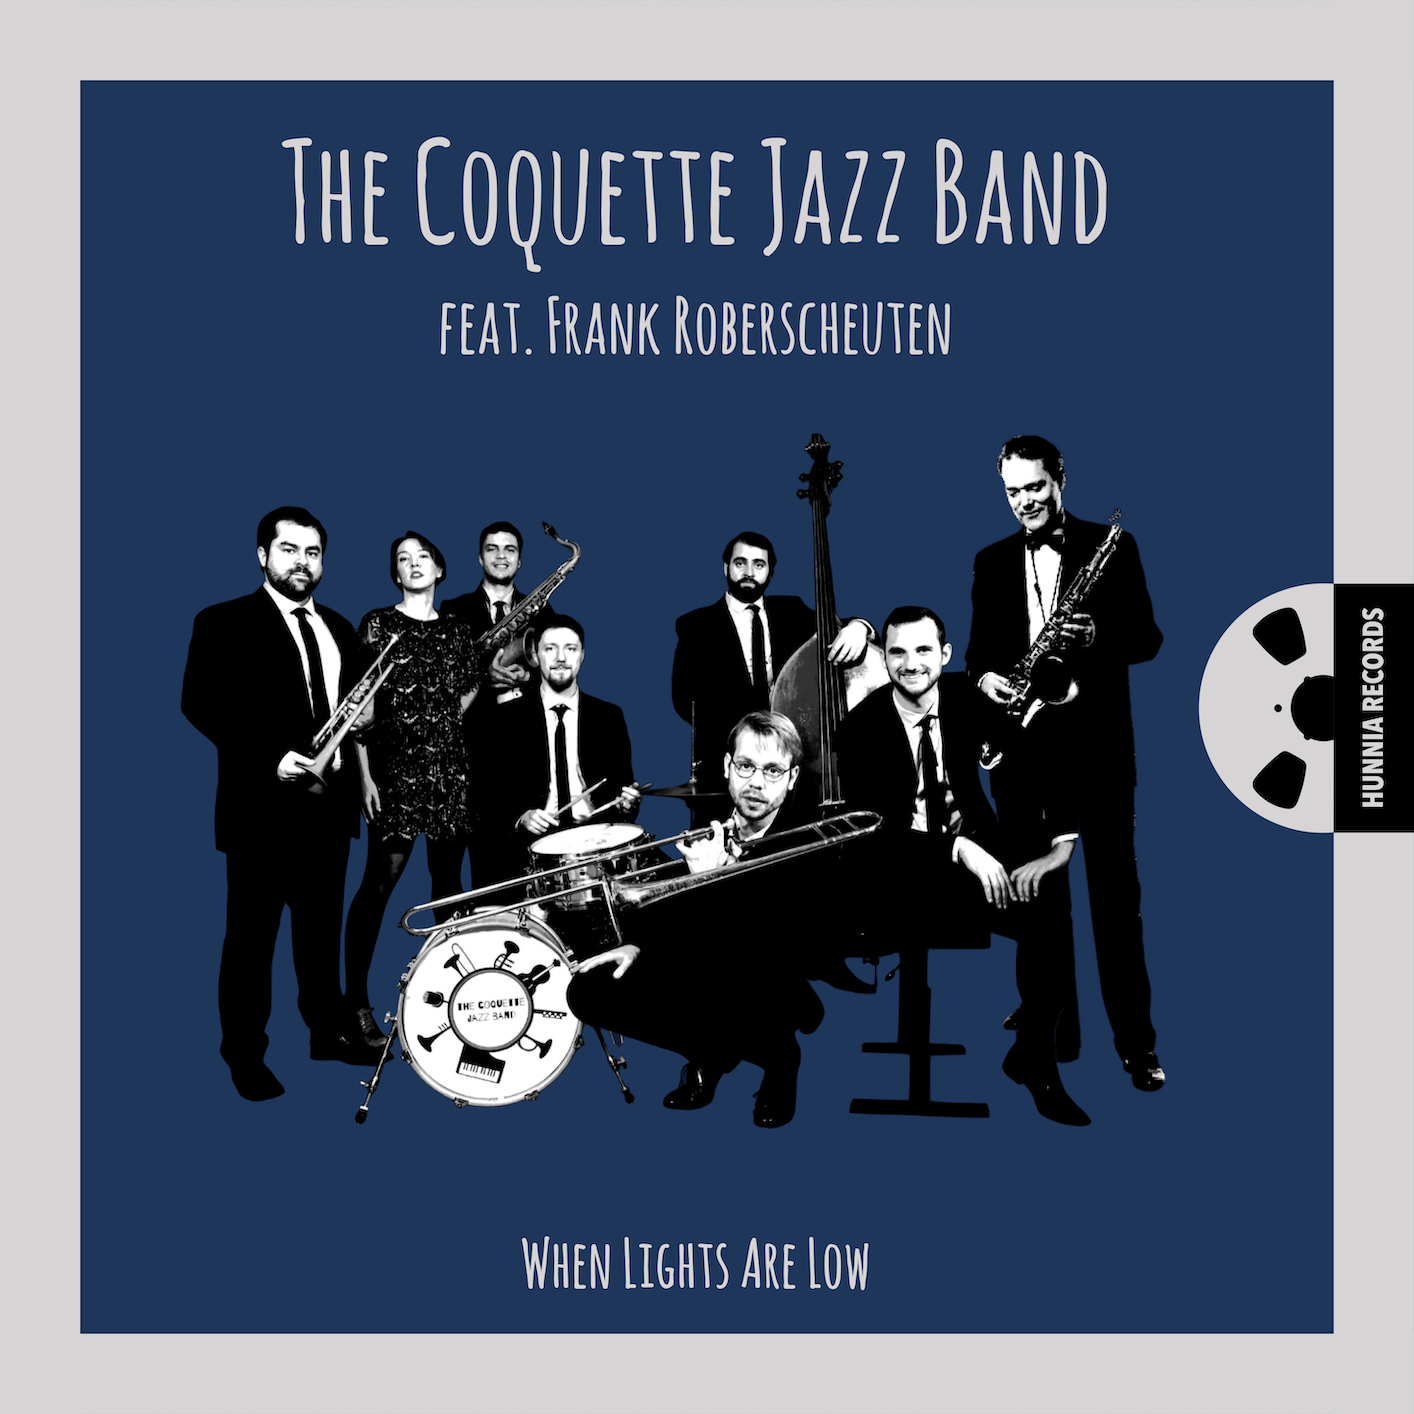 The Coquette Jazz Band – When Lights Are Low (2019/2021) [FLAC 24bit/96kHz]